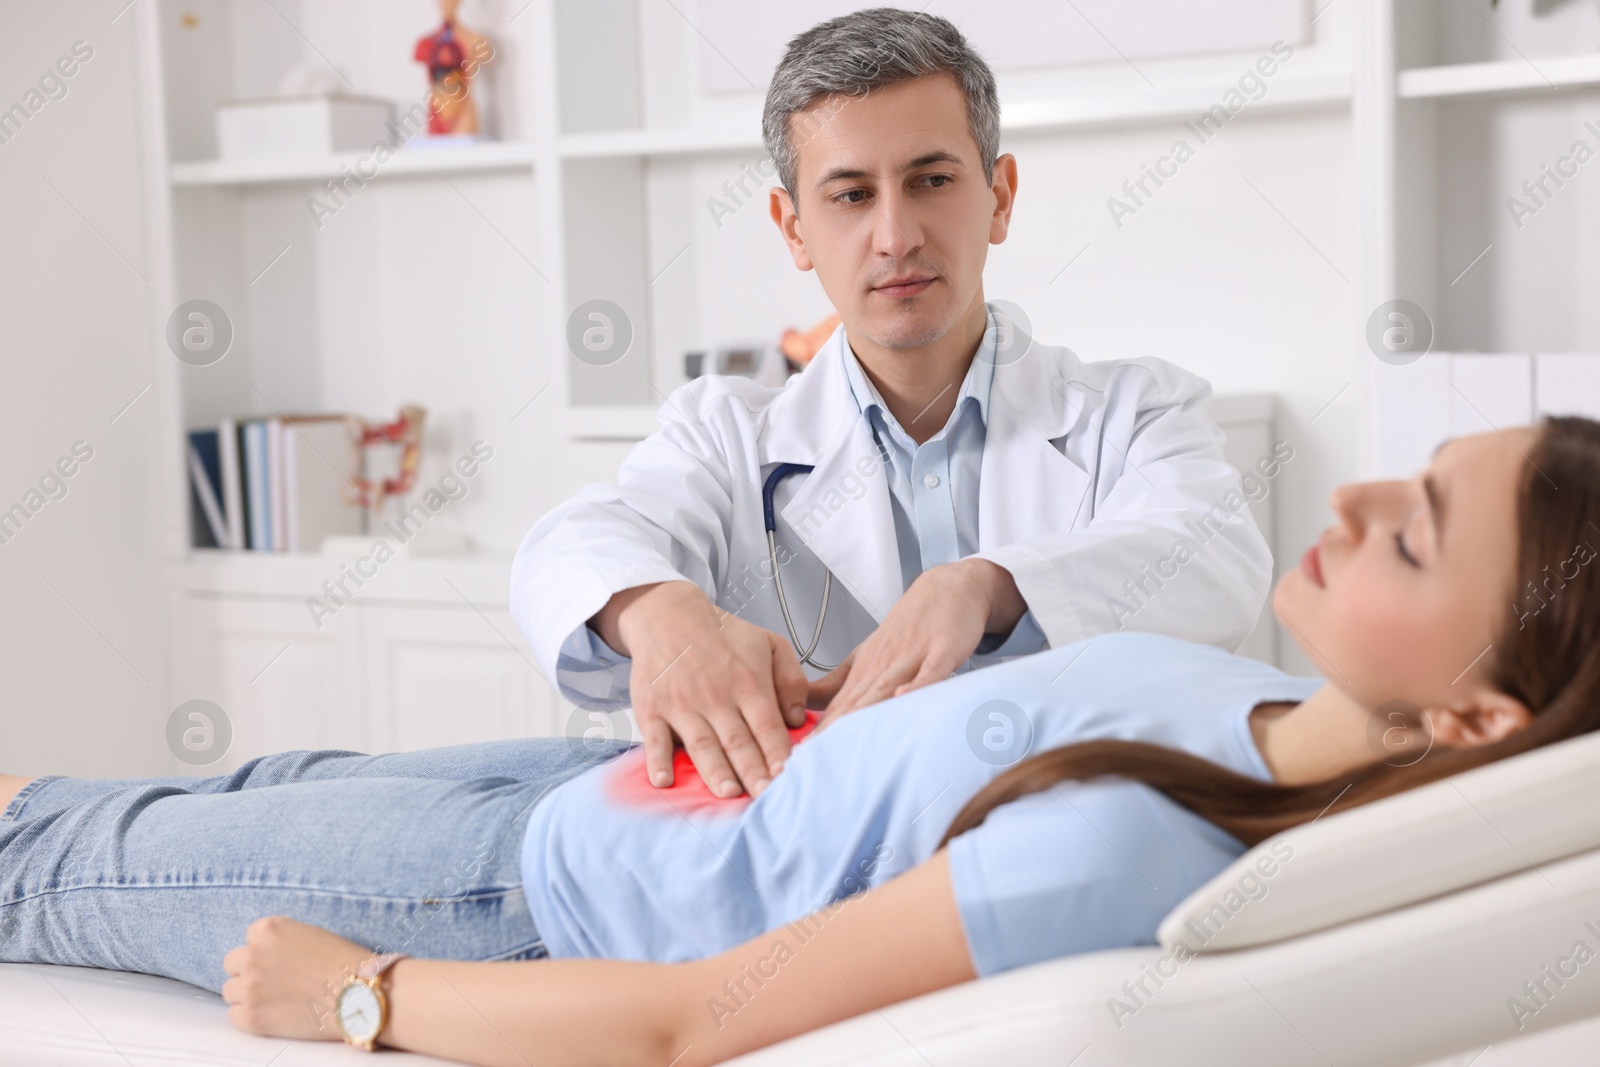 Image of Gastroenterologist examining patient with stomach pain on couch in clinic